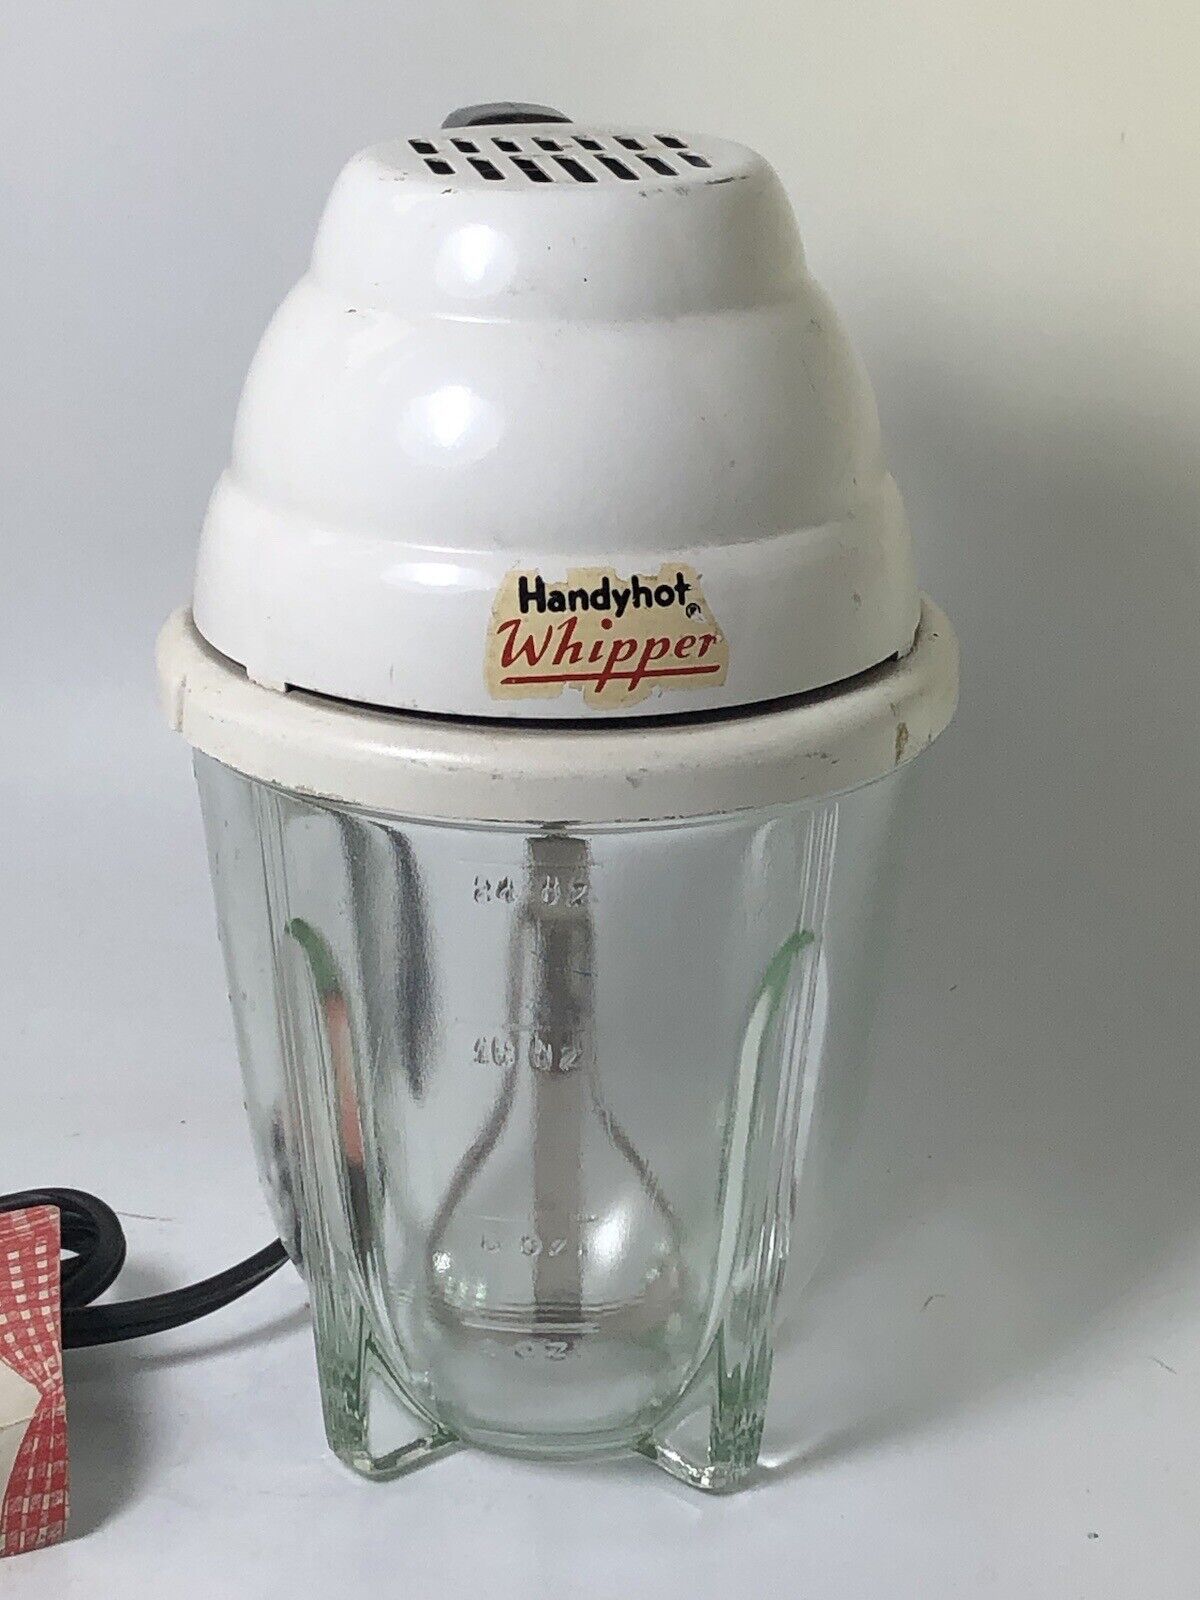 FREE SHIPPING Vintage Handyhot Whipper Single Beater Mixer Space Age MCM Design